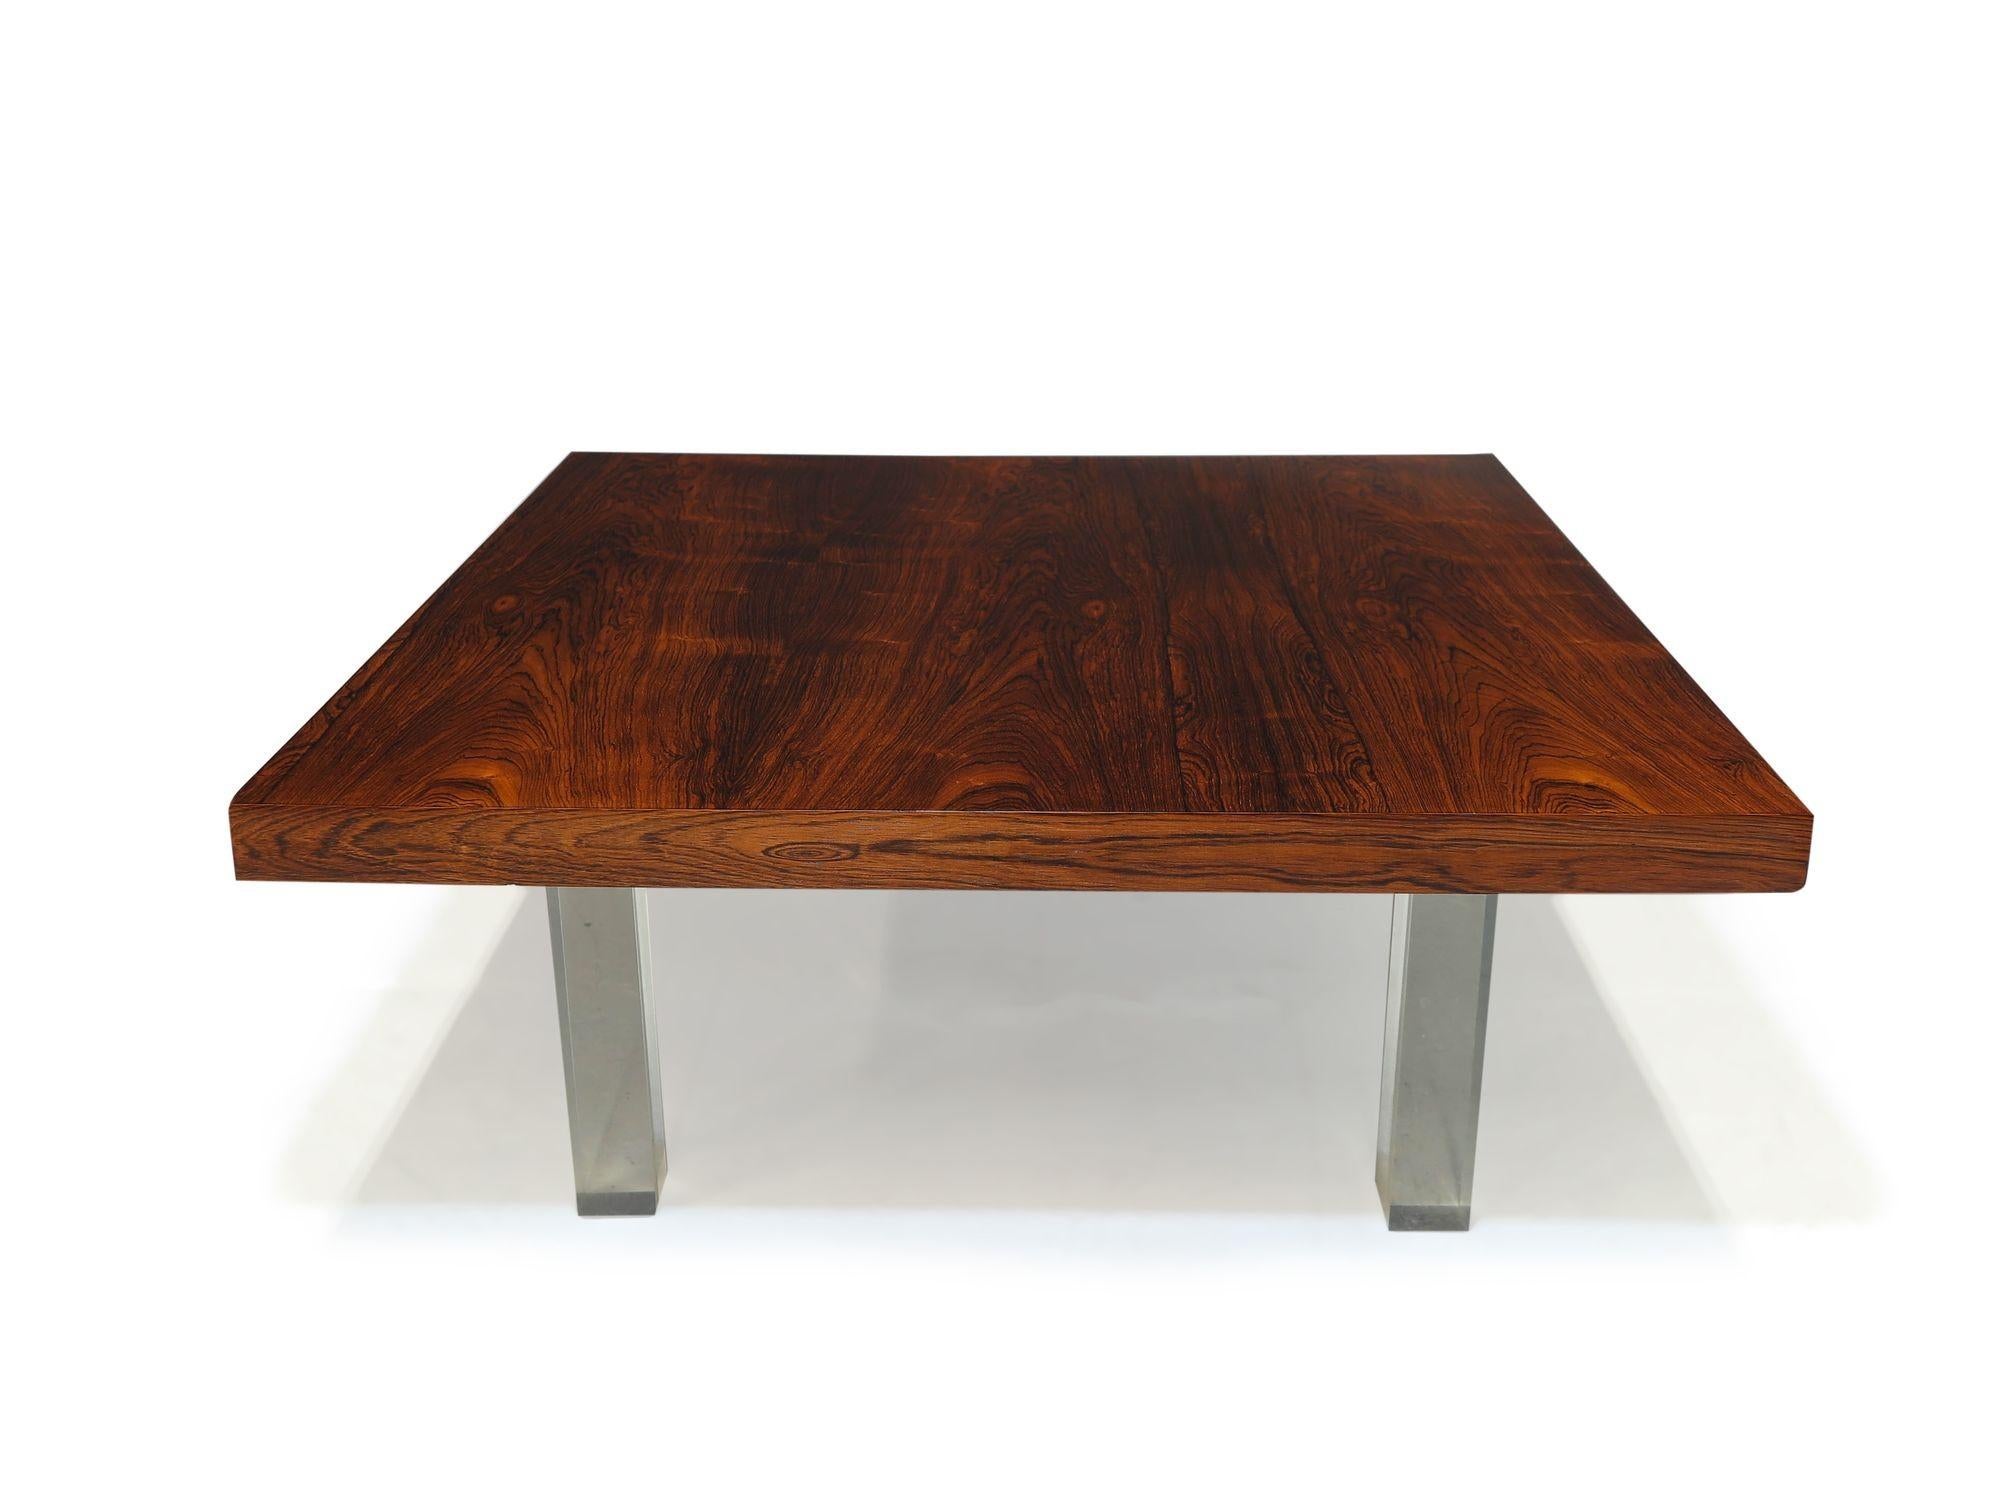 Midcentury rosewood coffee table designed by Milo Baughman for Thayer Coggin, circa 1968 United States.
The coffee table is crafted of rosewood with book-matched grain, raised on lucite legs. Restored in a natural oil finish. 
Measurements 
W